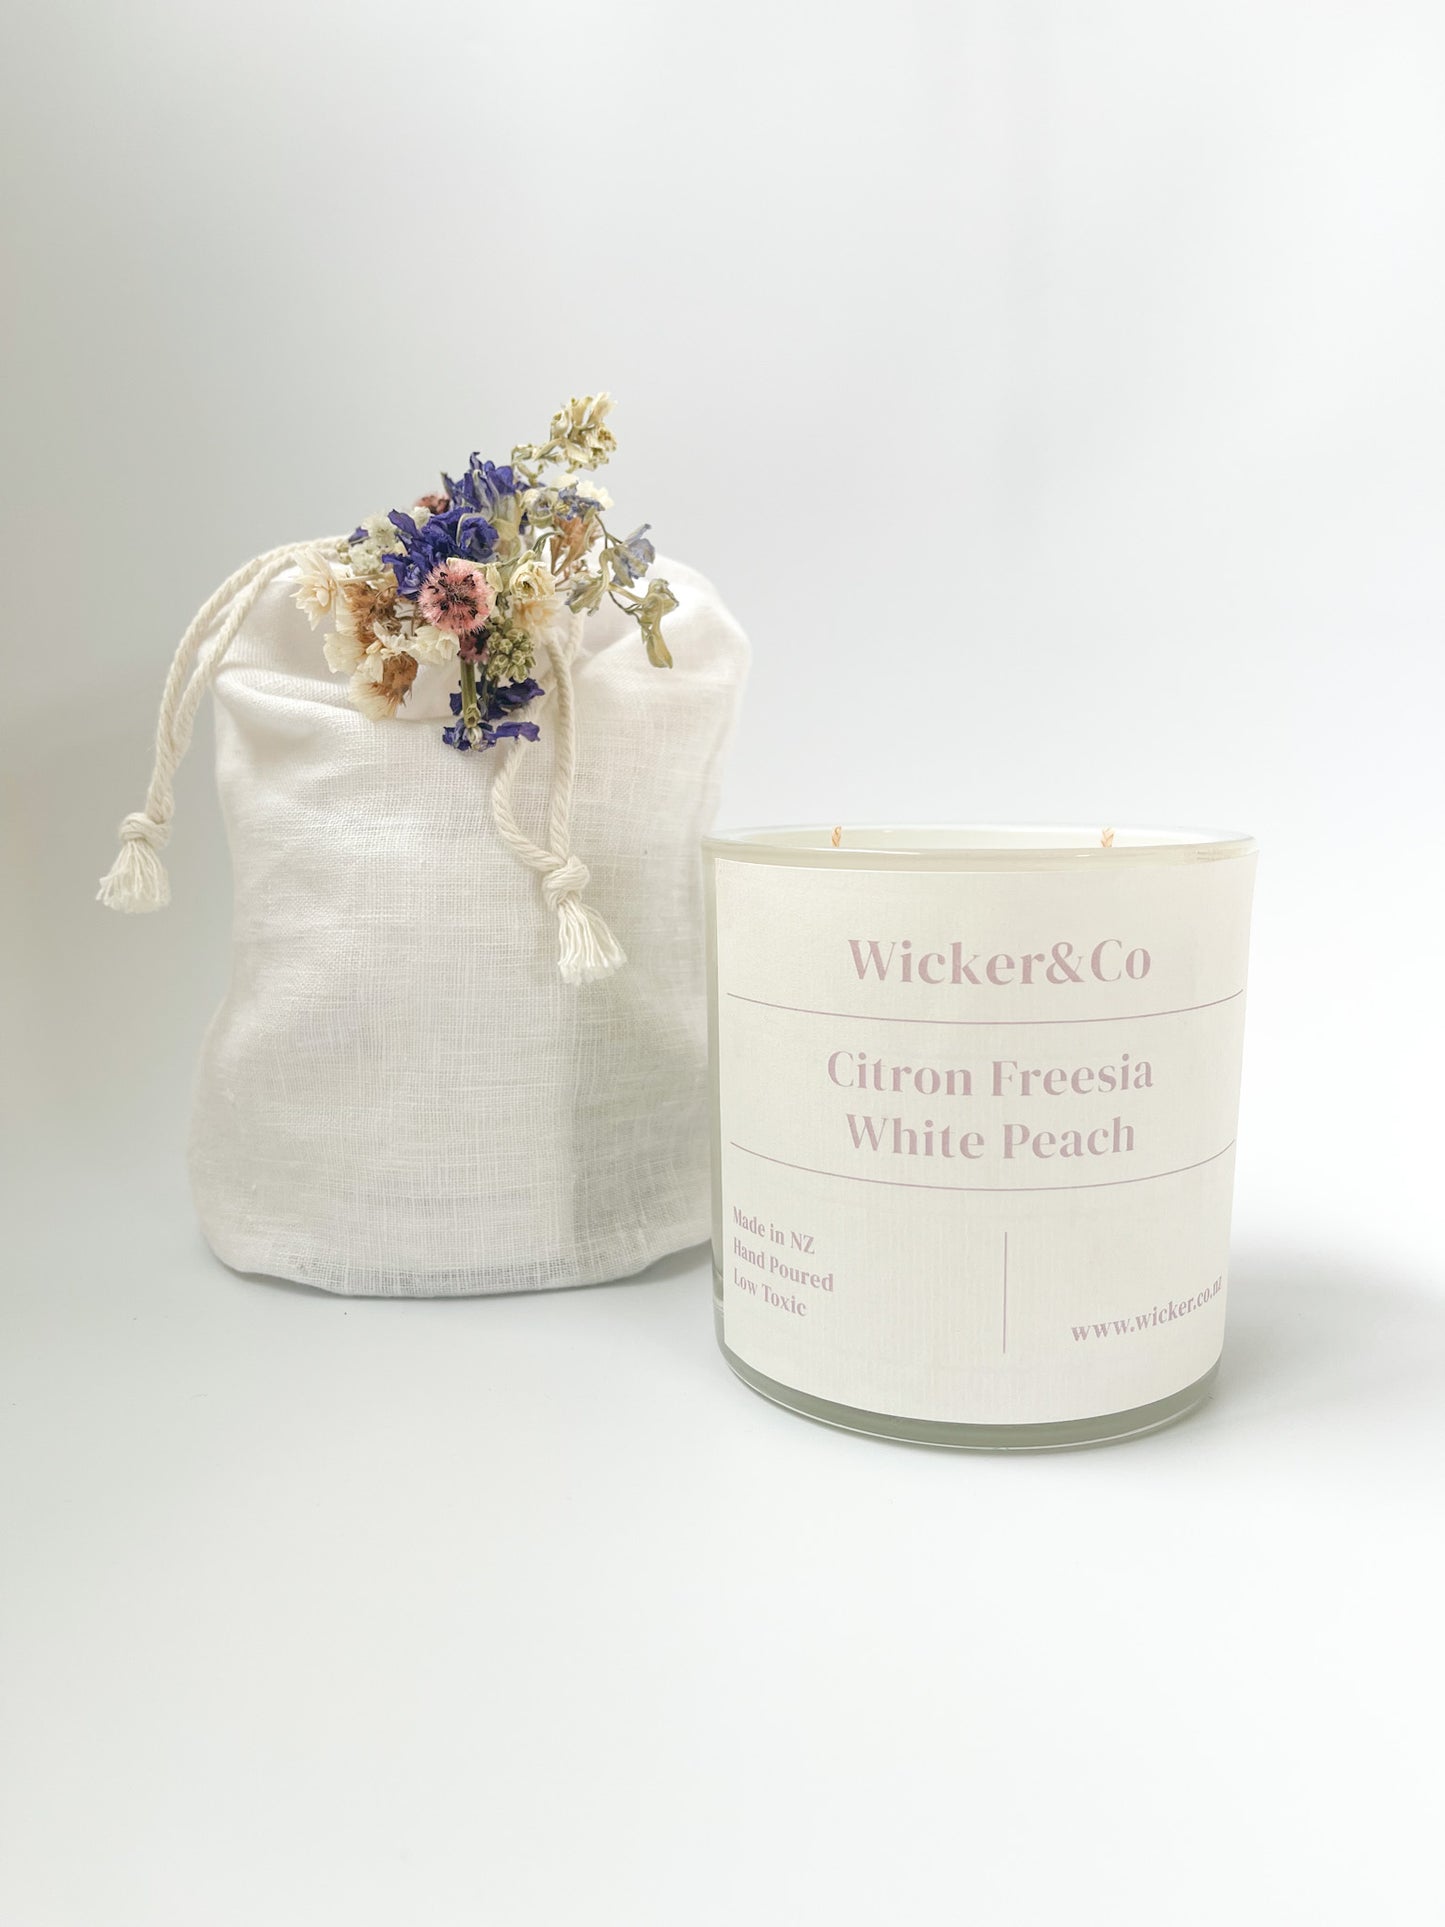 Wicker&Co Candle with Line  Bag & Flower Posey - Citron, Freesia, White Peach.